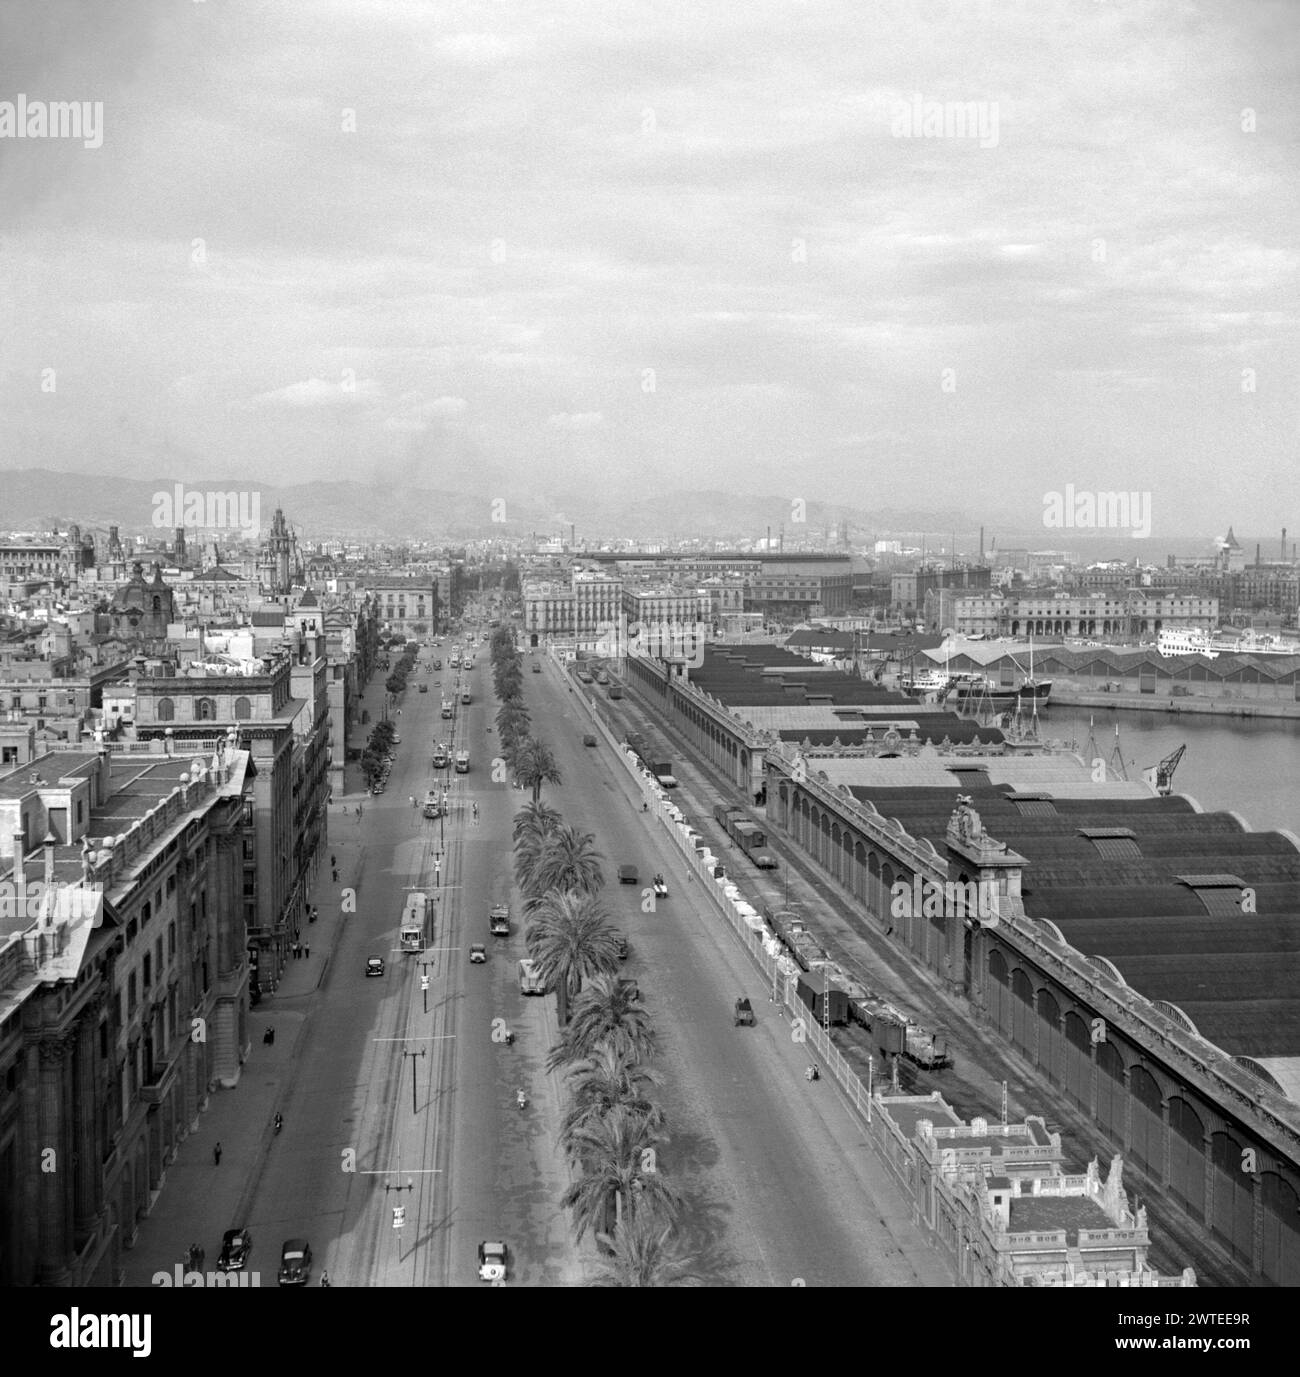 A view from the viewing gallery of Mirador de Colom, Port Vell, Barcelona, Spain in 1955. Looking eastwards along Passeig [Pg] de Colom. The street is a palm-tree-lined boulevard that runs along the waterfront, separating Old Barcelona (Cuitat Vella, left) from the Waterfront District (Port Vell, Barceloneta, right). The warehouses (right) have been demolished, replaced by an open pedestrianised area next to the harbour – a vintage 1950s photograph. Stock Photo